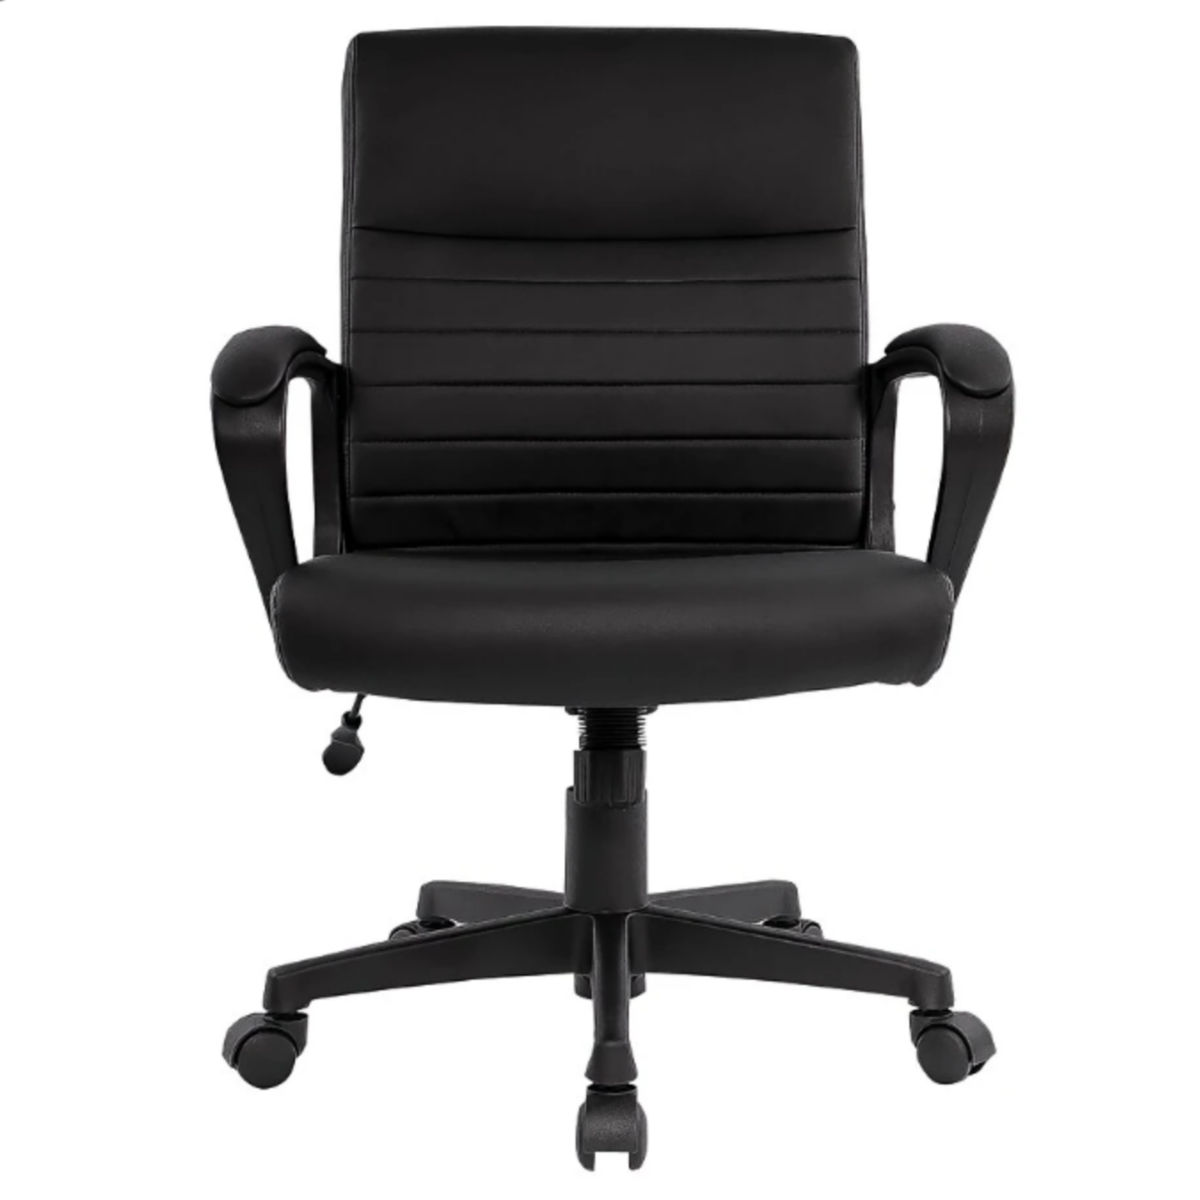 Staples Tervina Luxura Mid-Back Manager Chair